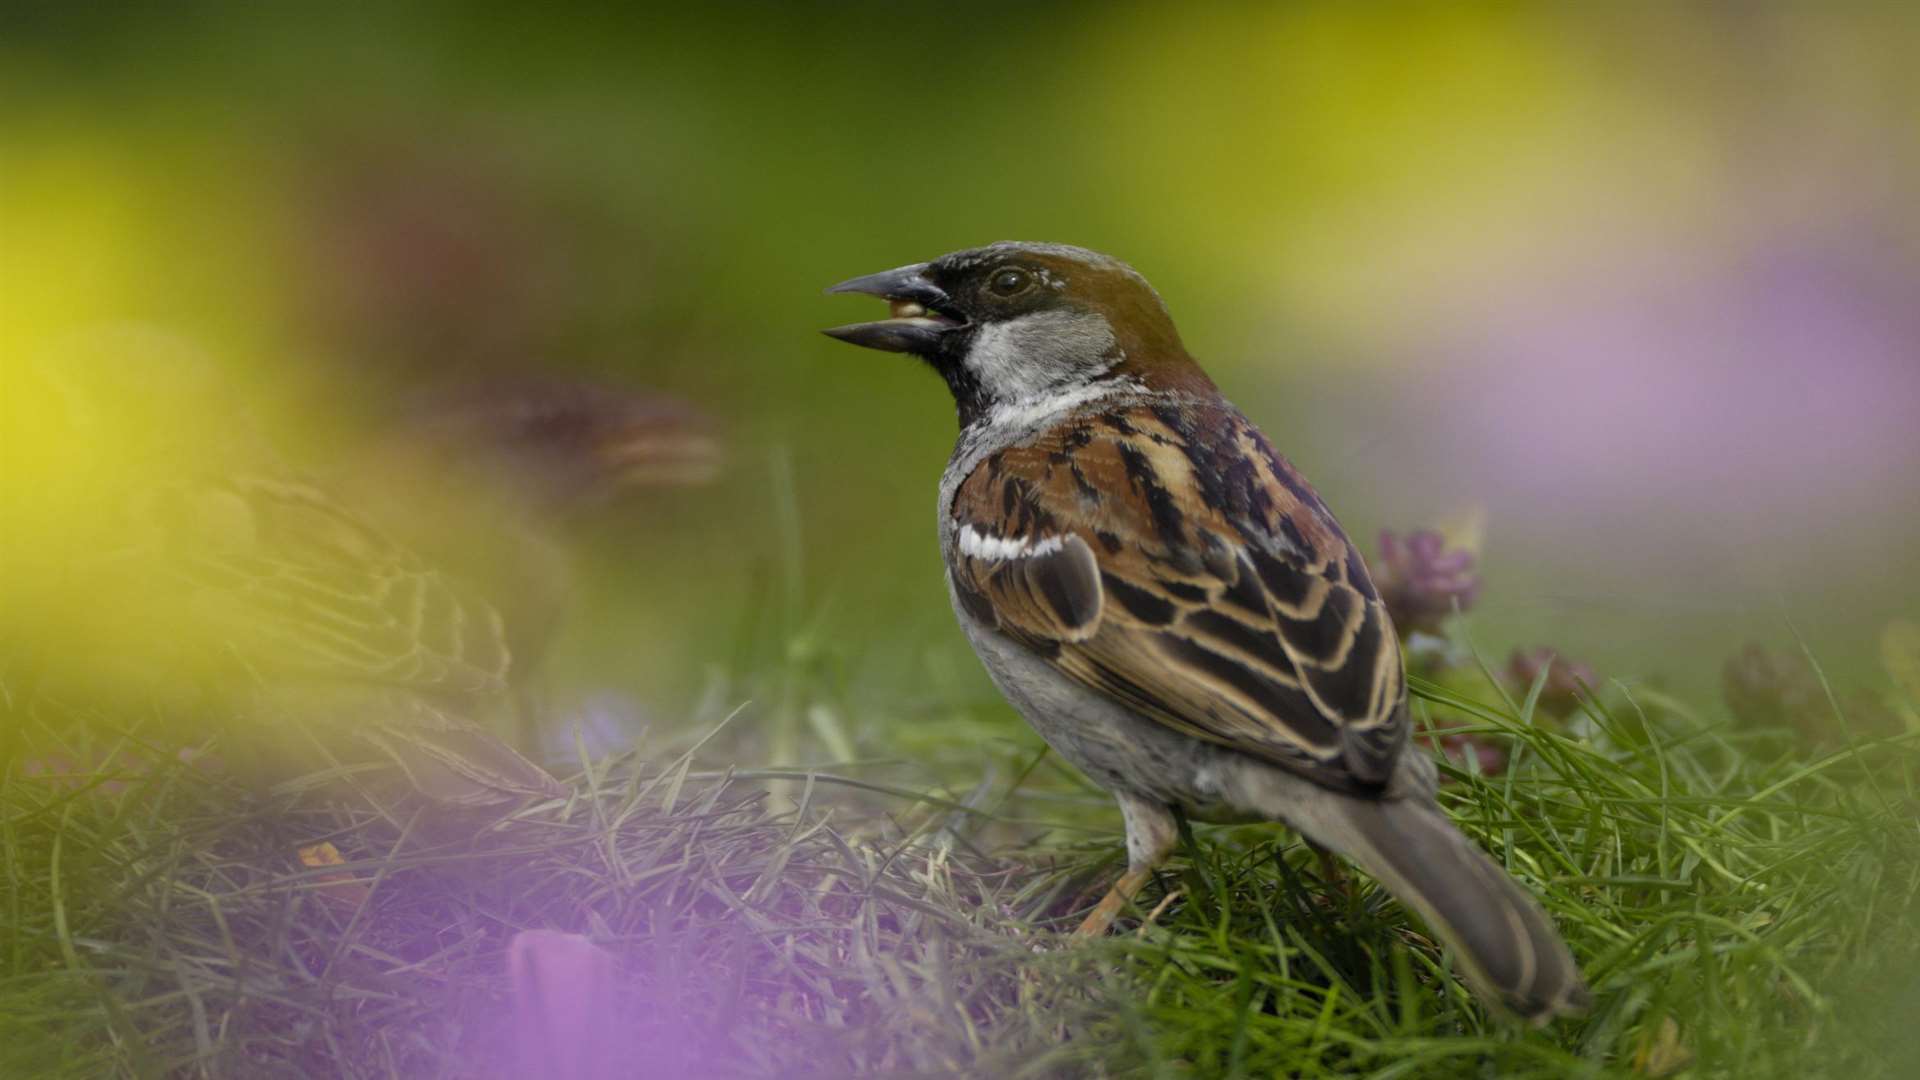 The house sparrow was the most commonly spotted in Kent last year